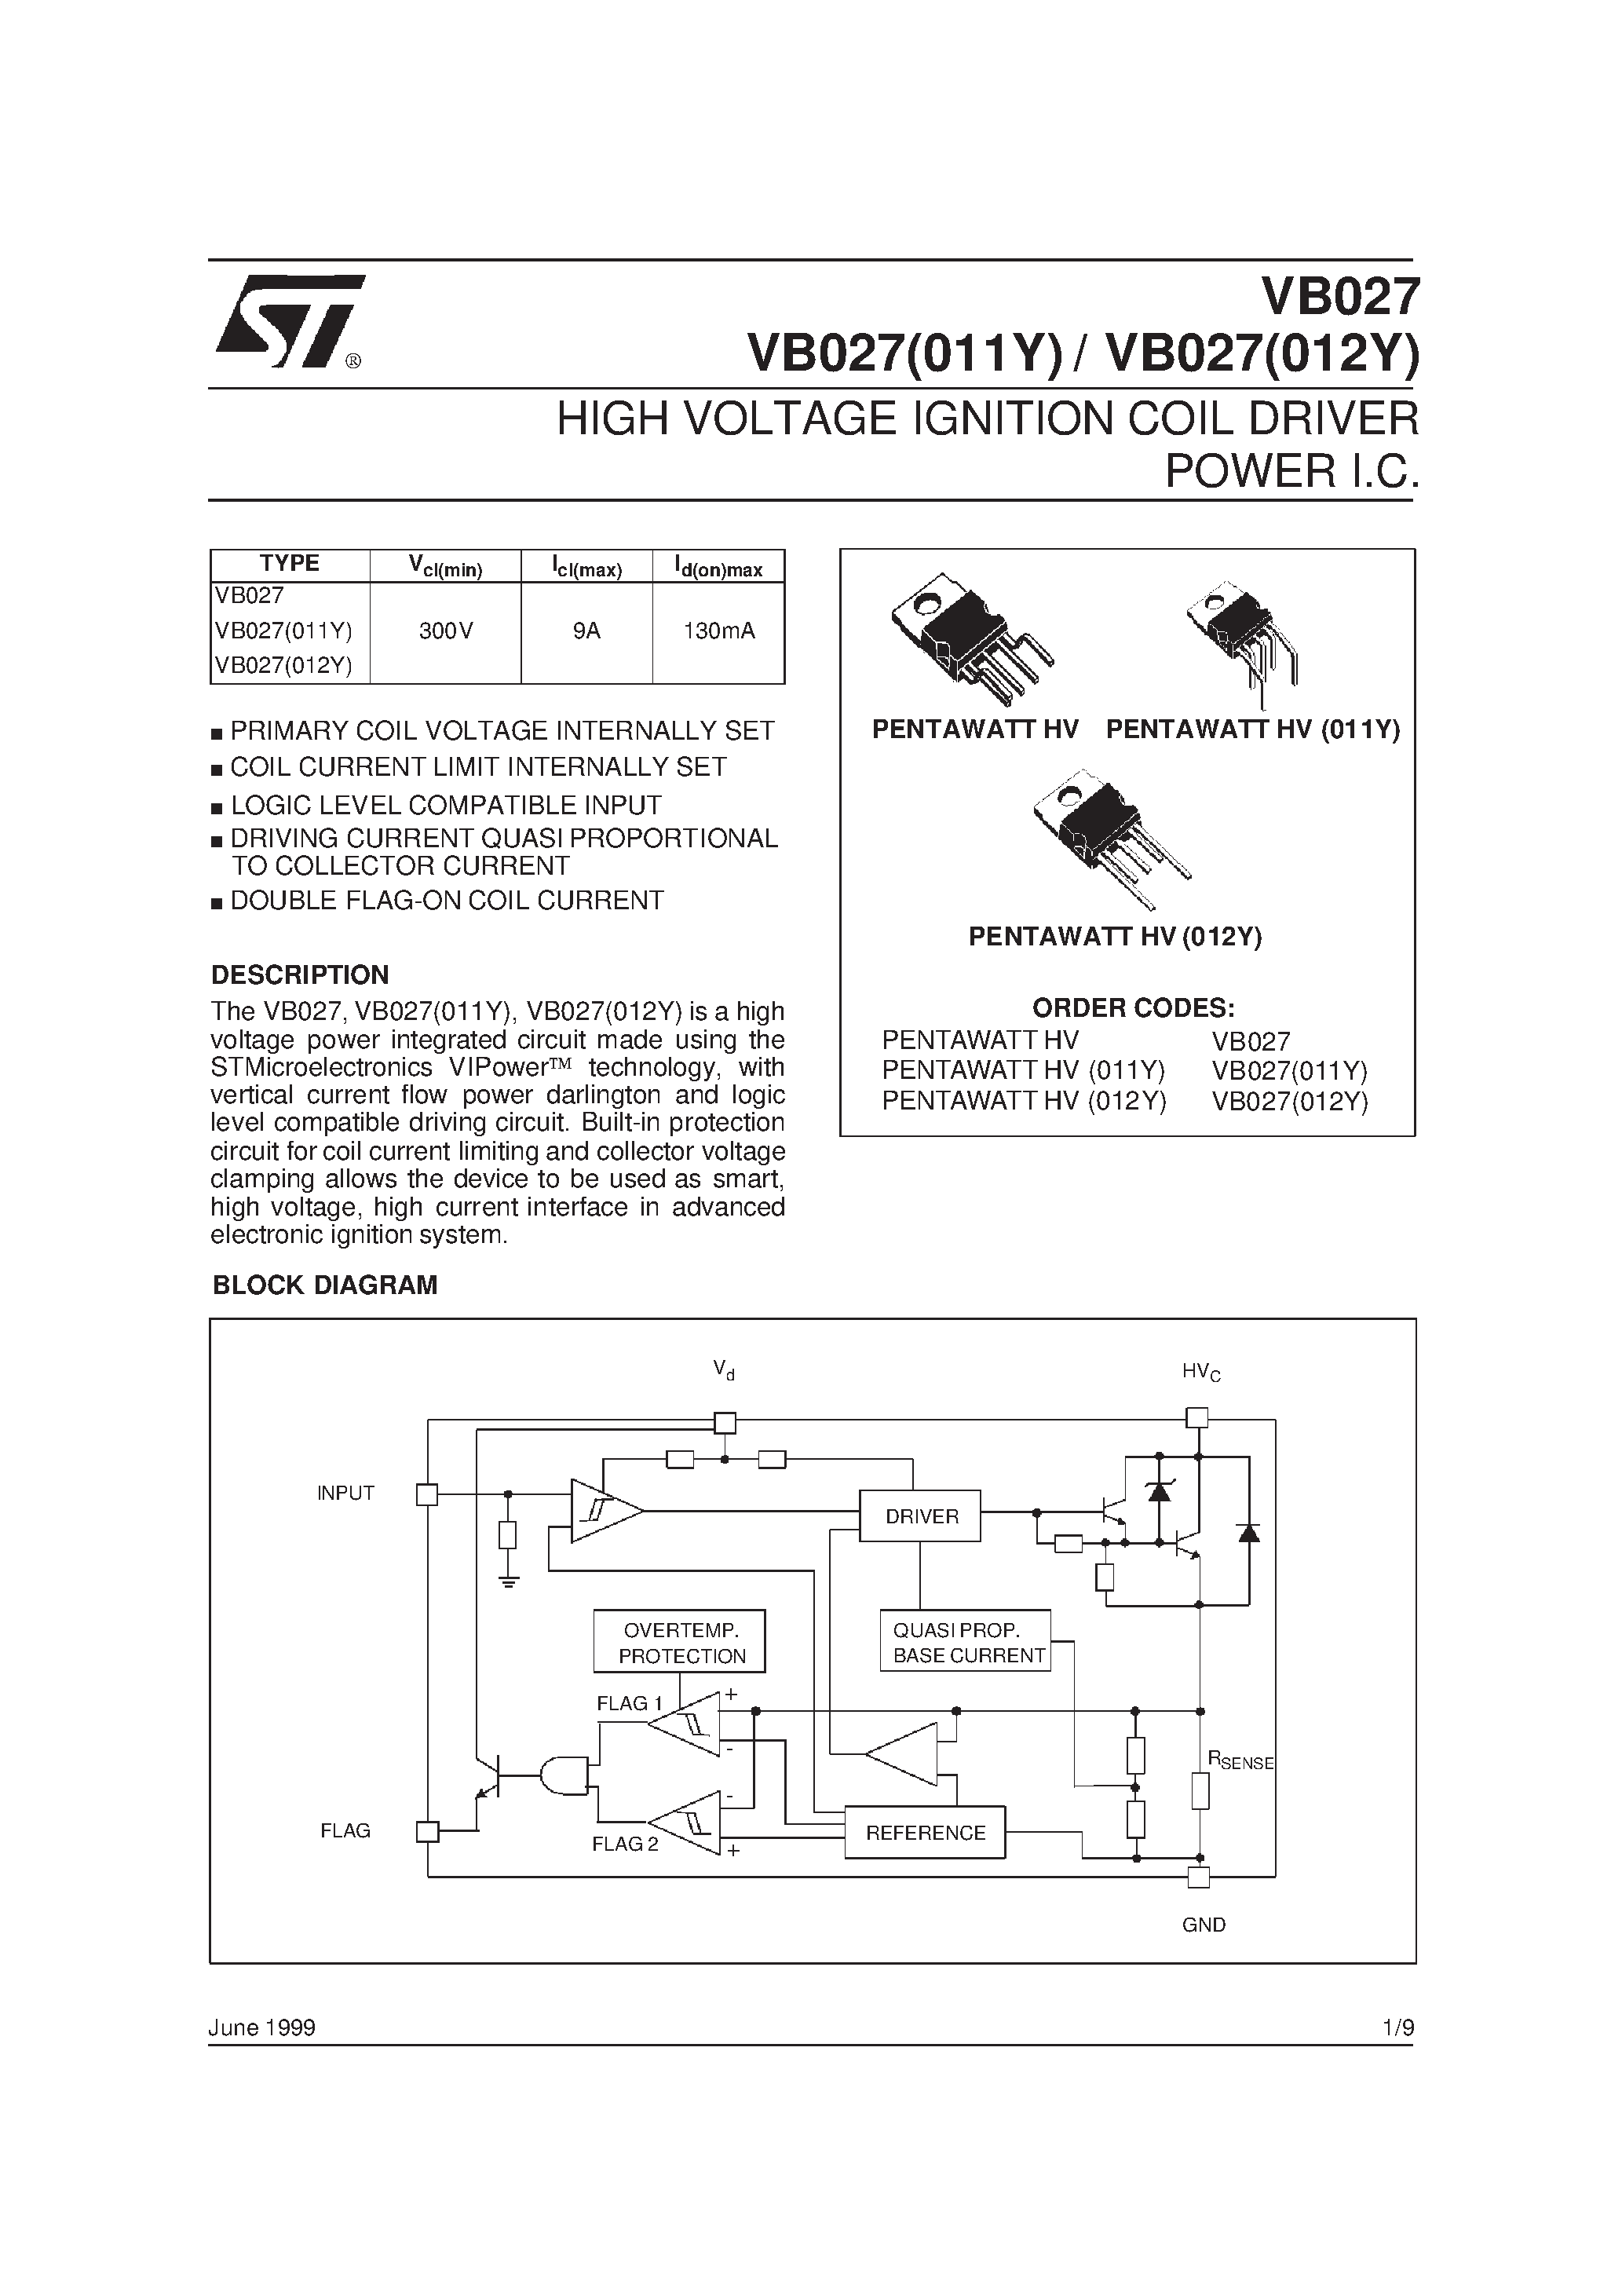 Datasheet VB027(012Y) - HIGH VOLTAGE IGNITION COIL DRIVER POWER I.C. page 1